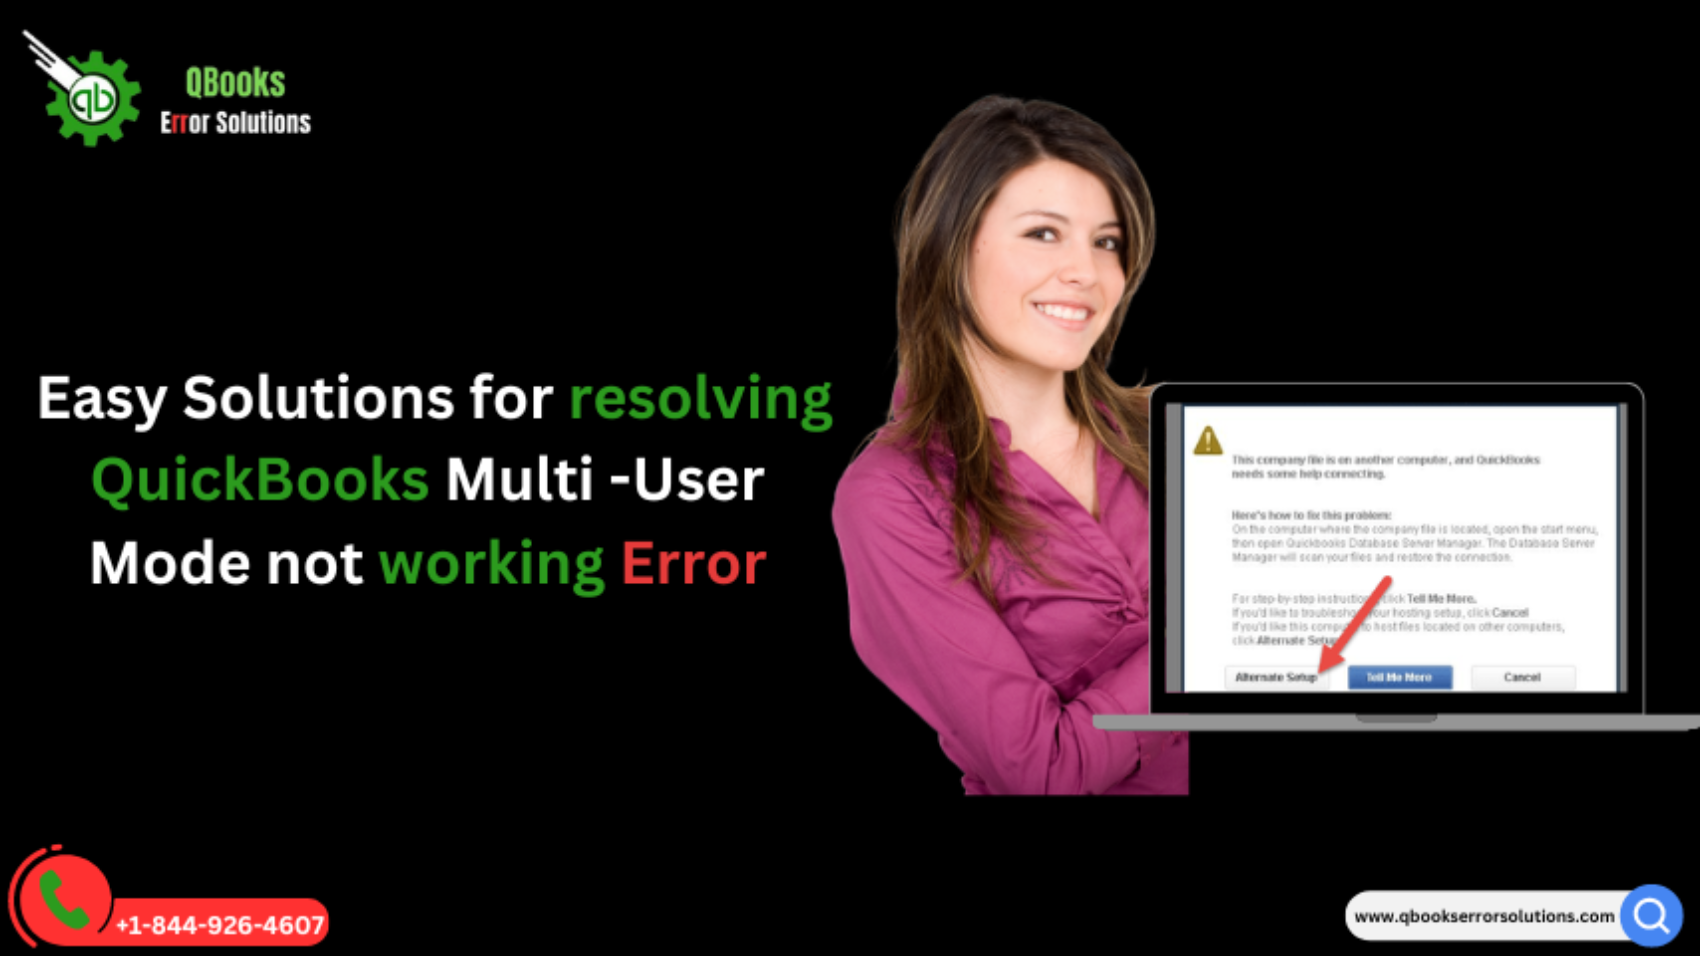 Easy Solutions for resolving QuickBooks Multi -User Mode not working issues